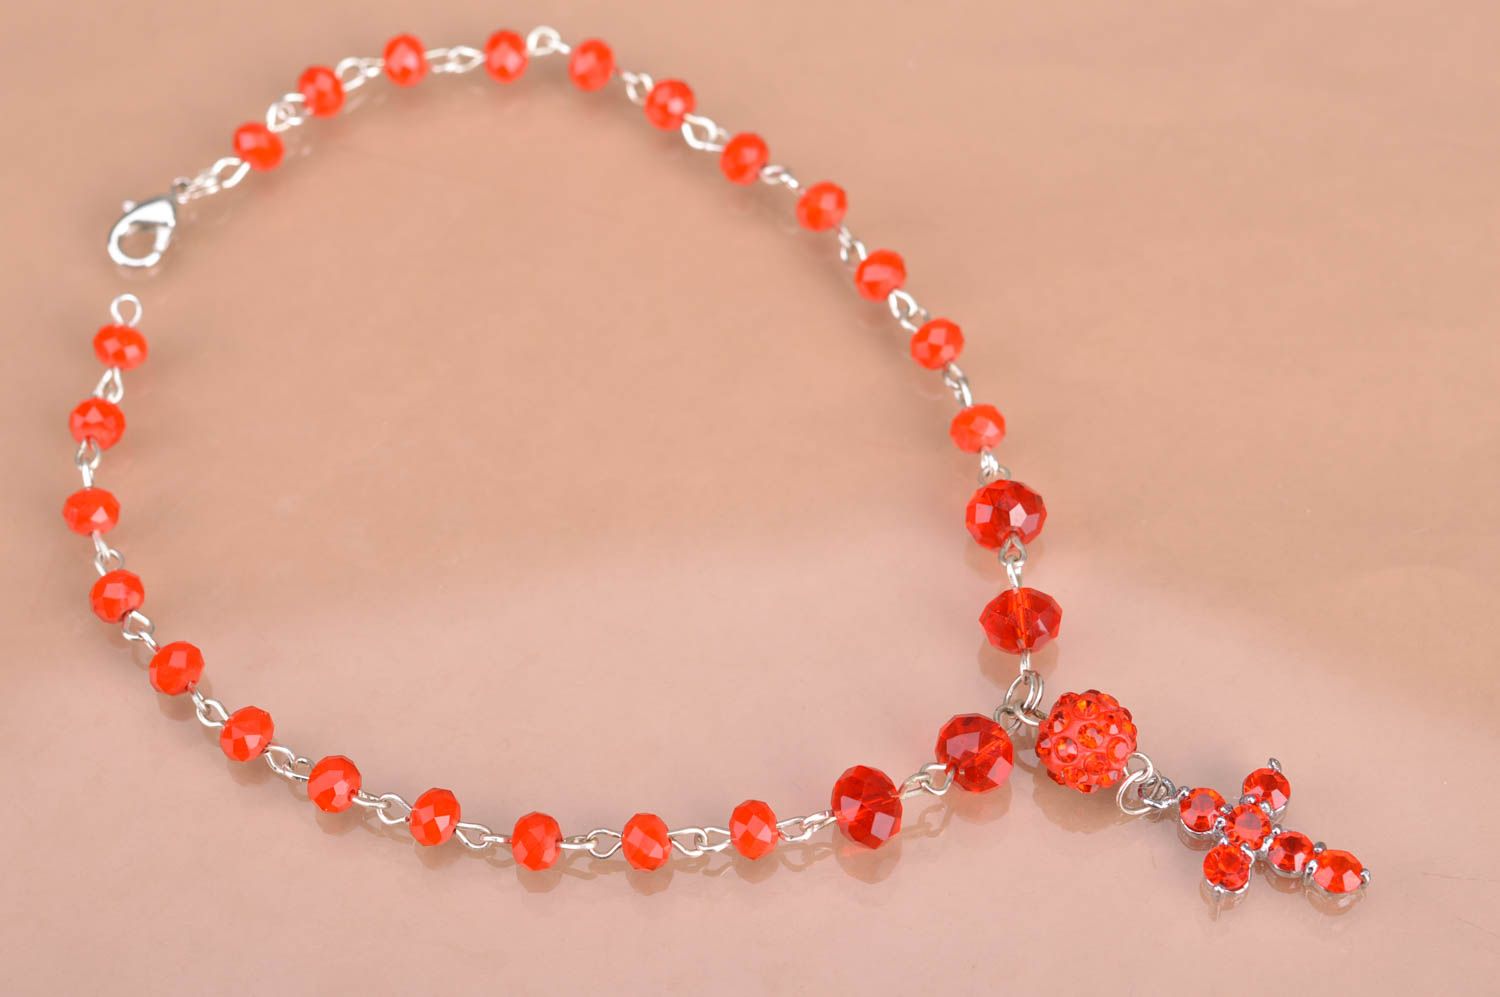 Handmade bright red beaded necklace with cross pendant designer for children photo 2